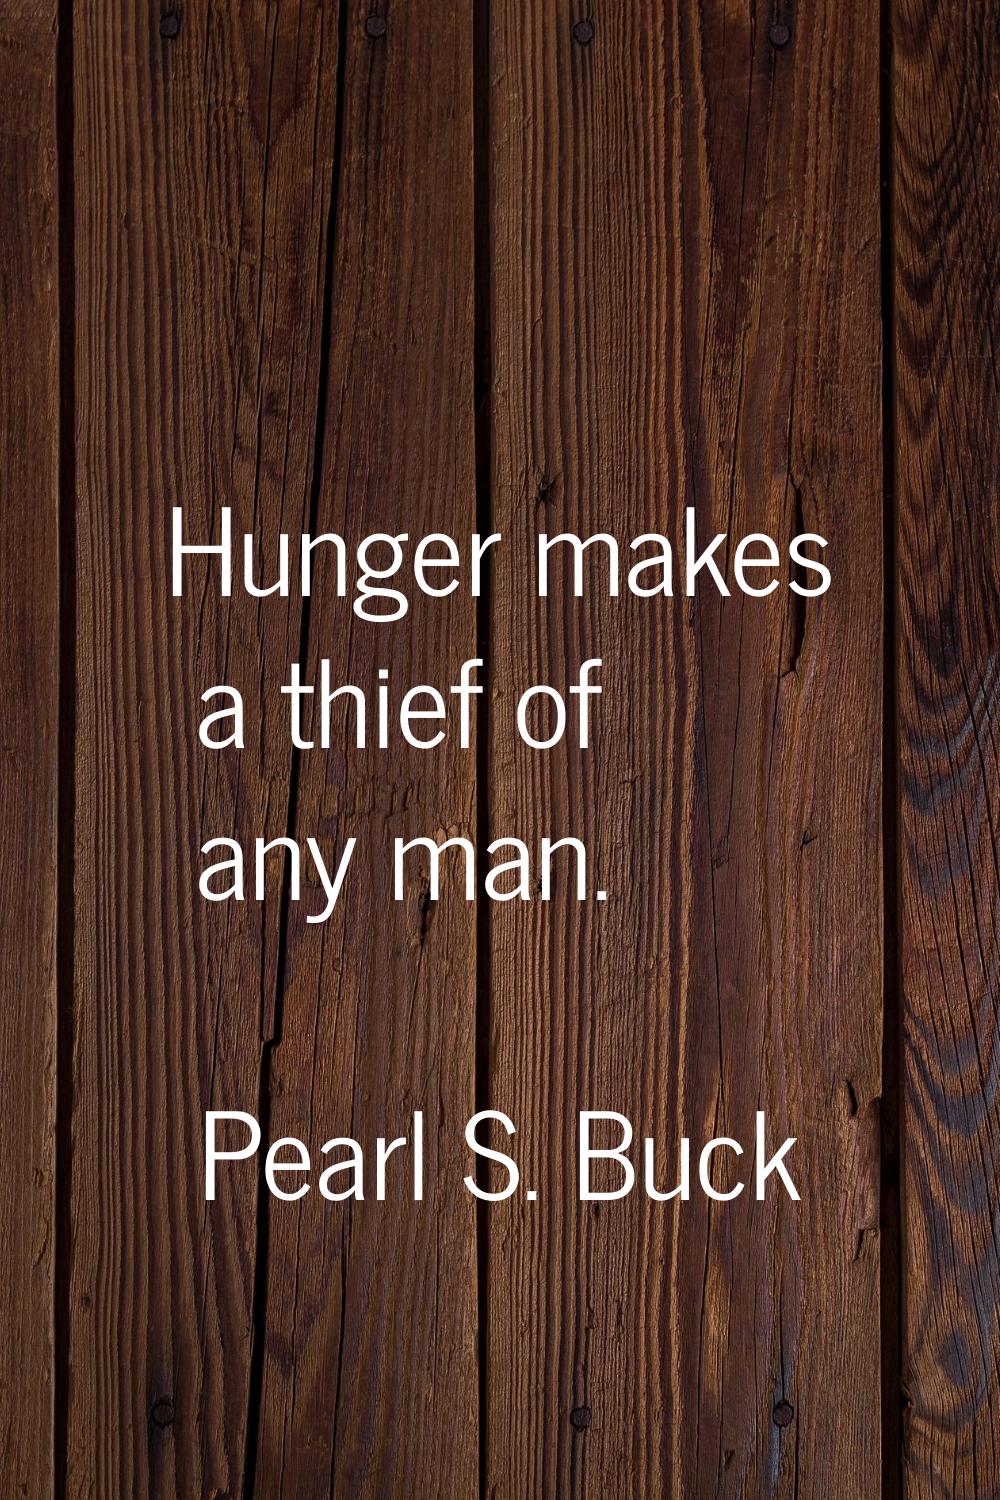 Hunger makes a thief of any man.